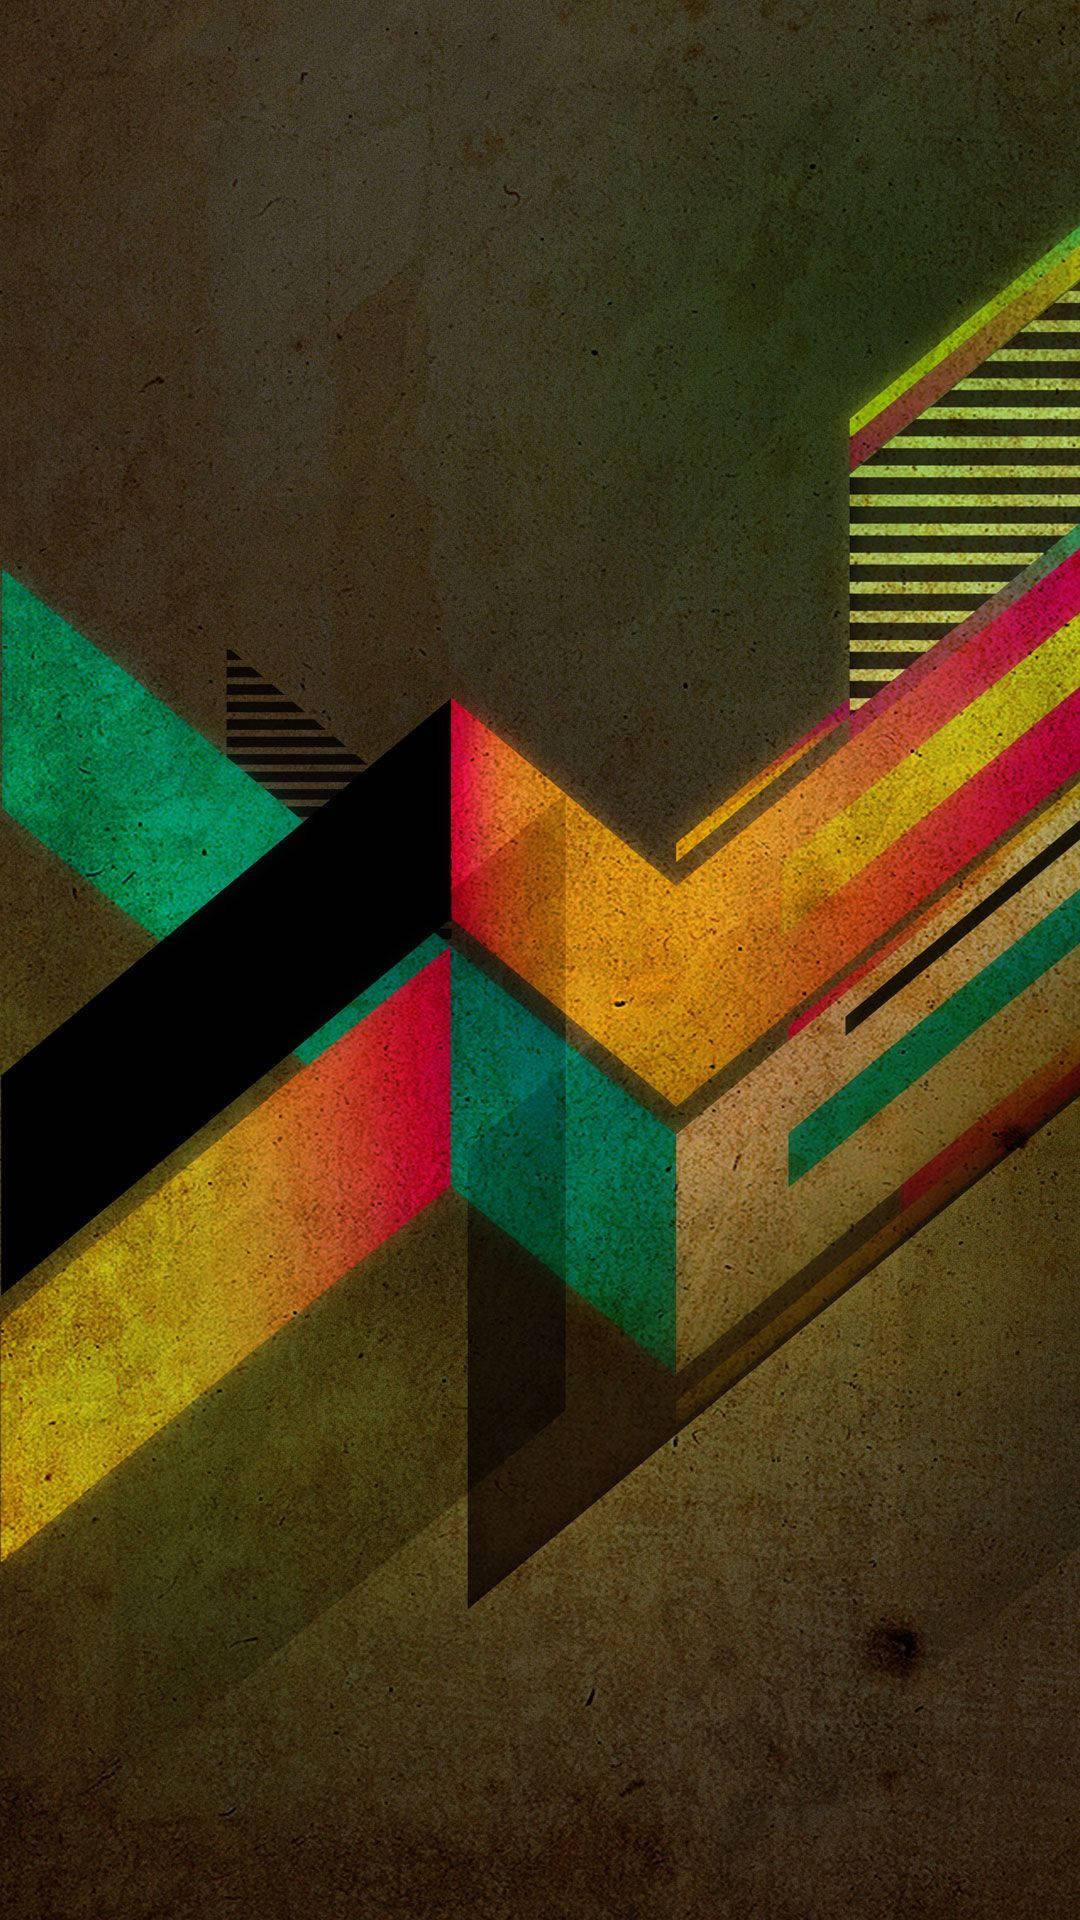 Abstract Colour Retro Aesthetic Iphone Wallpaper